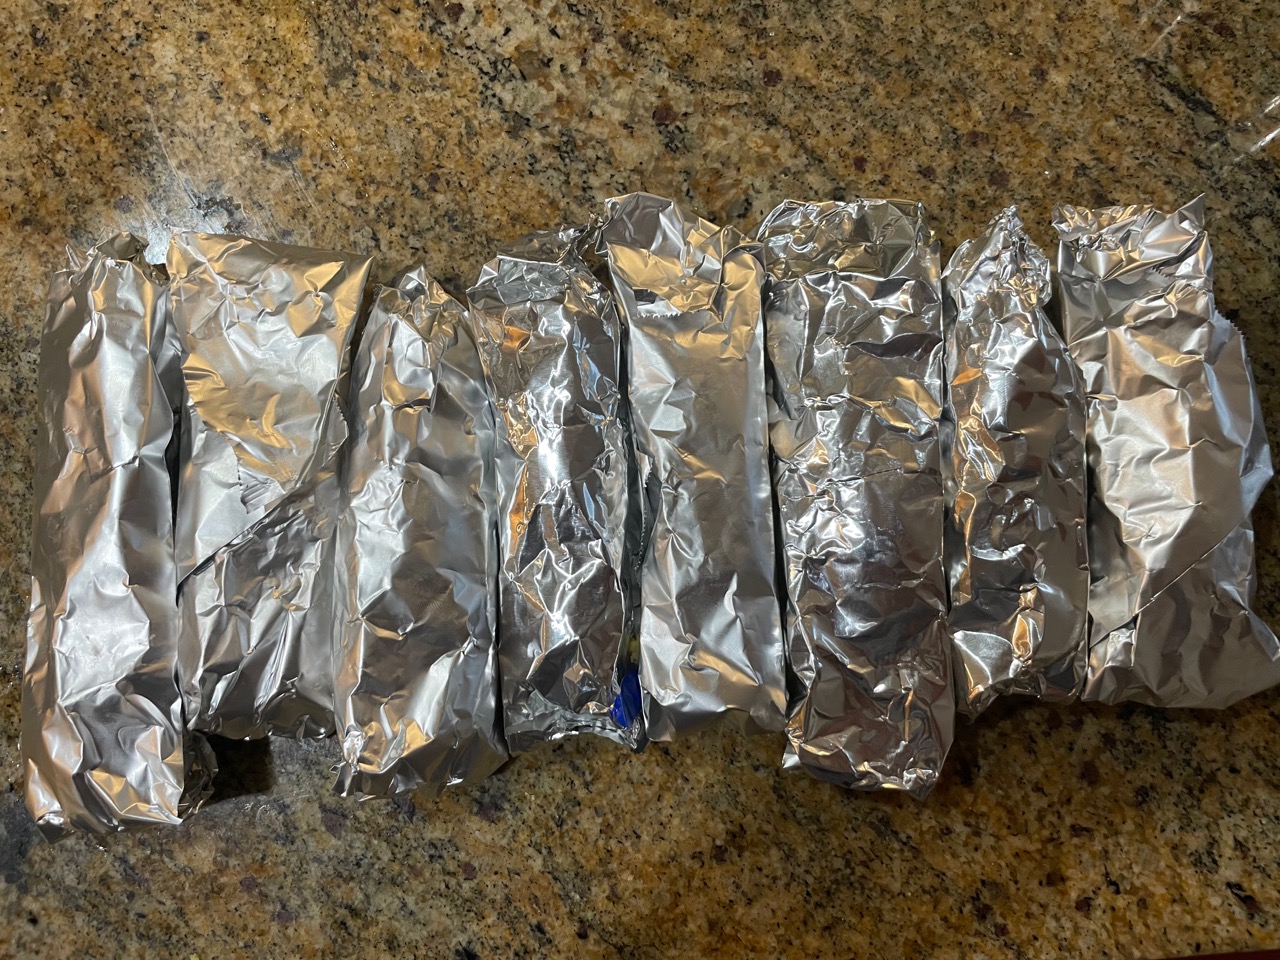 taquitos wrapped in foil